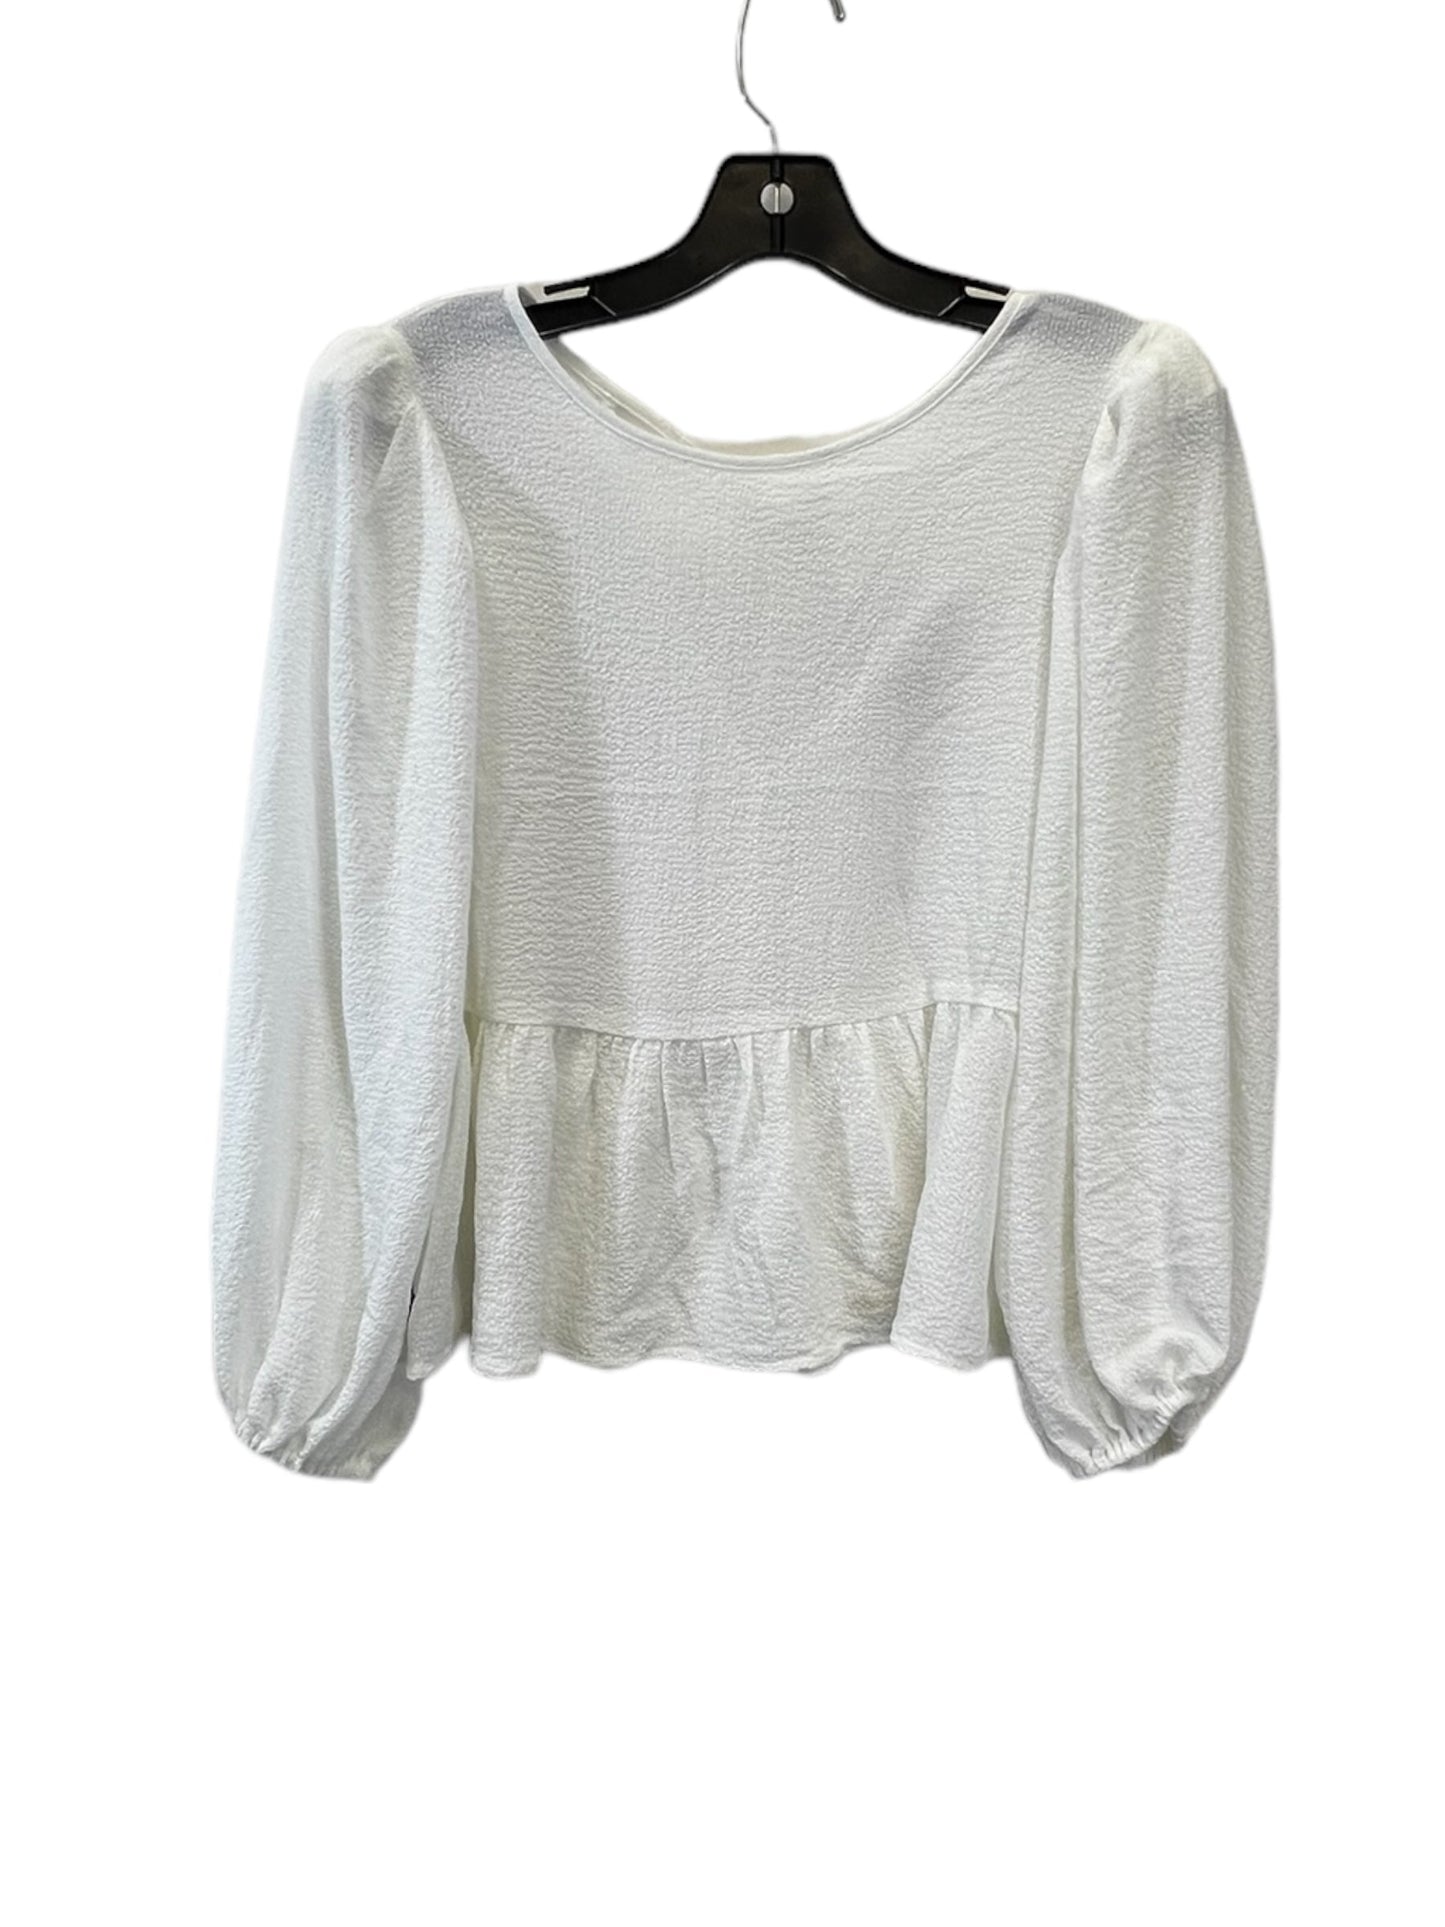 White Top Long Sleeve Express, Size Xs